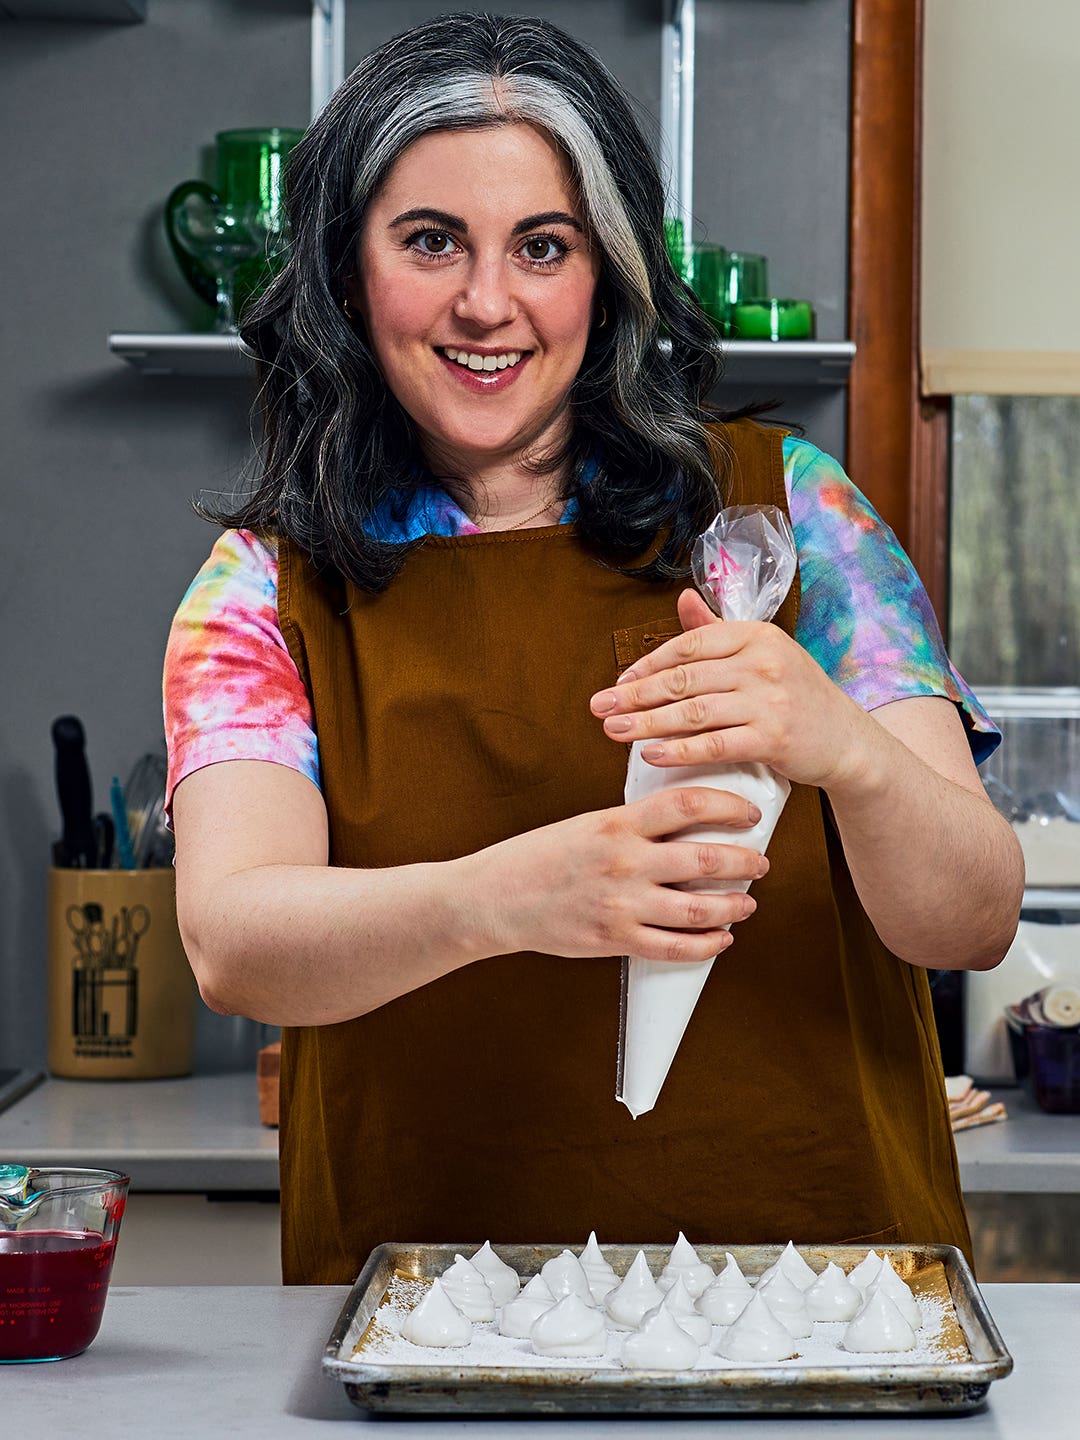 Claire Saffitz wearing a brown apron and making meringues on a kitchen island.